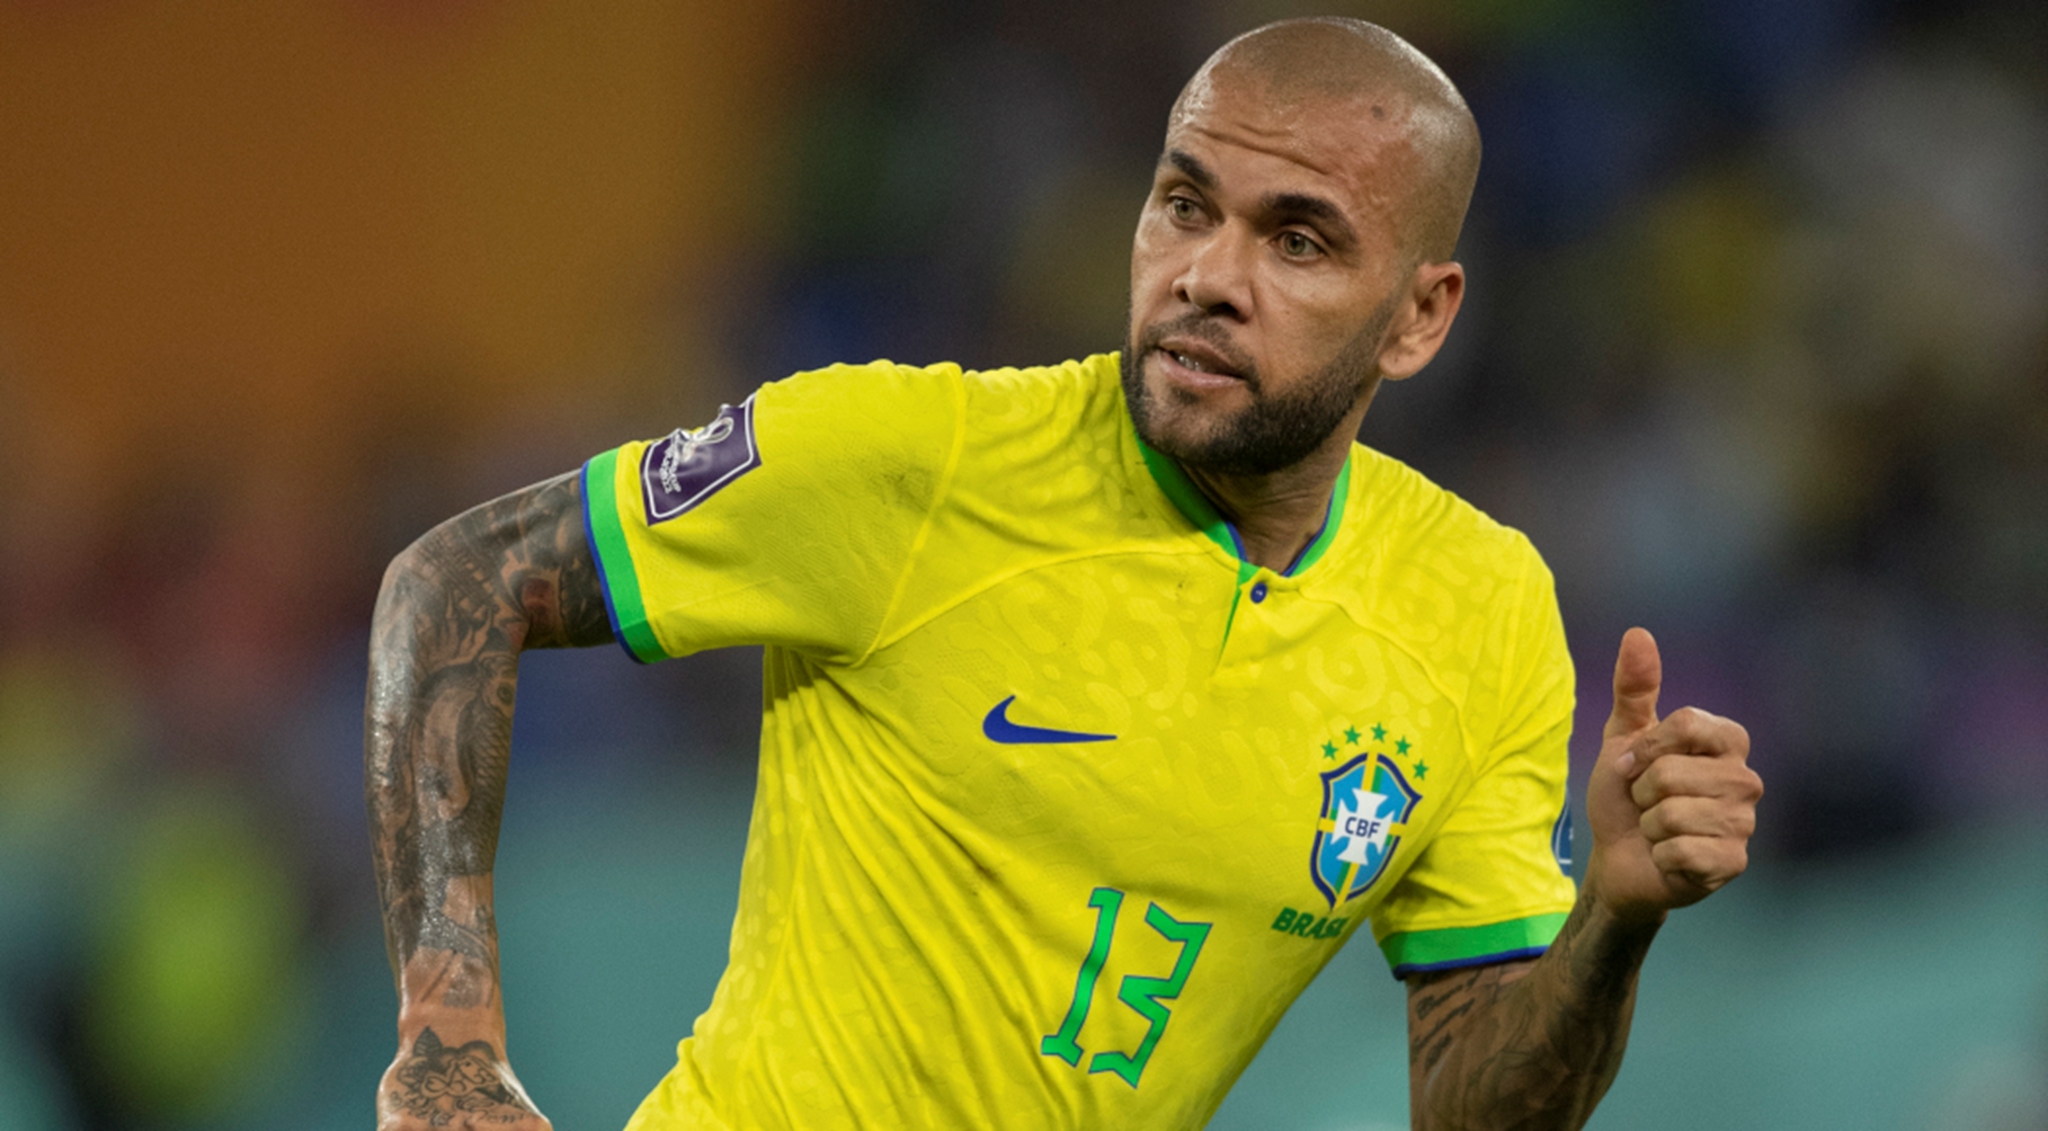 Alves Says He Is Innocent In First Interview Since Arrest